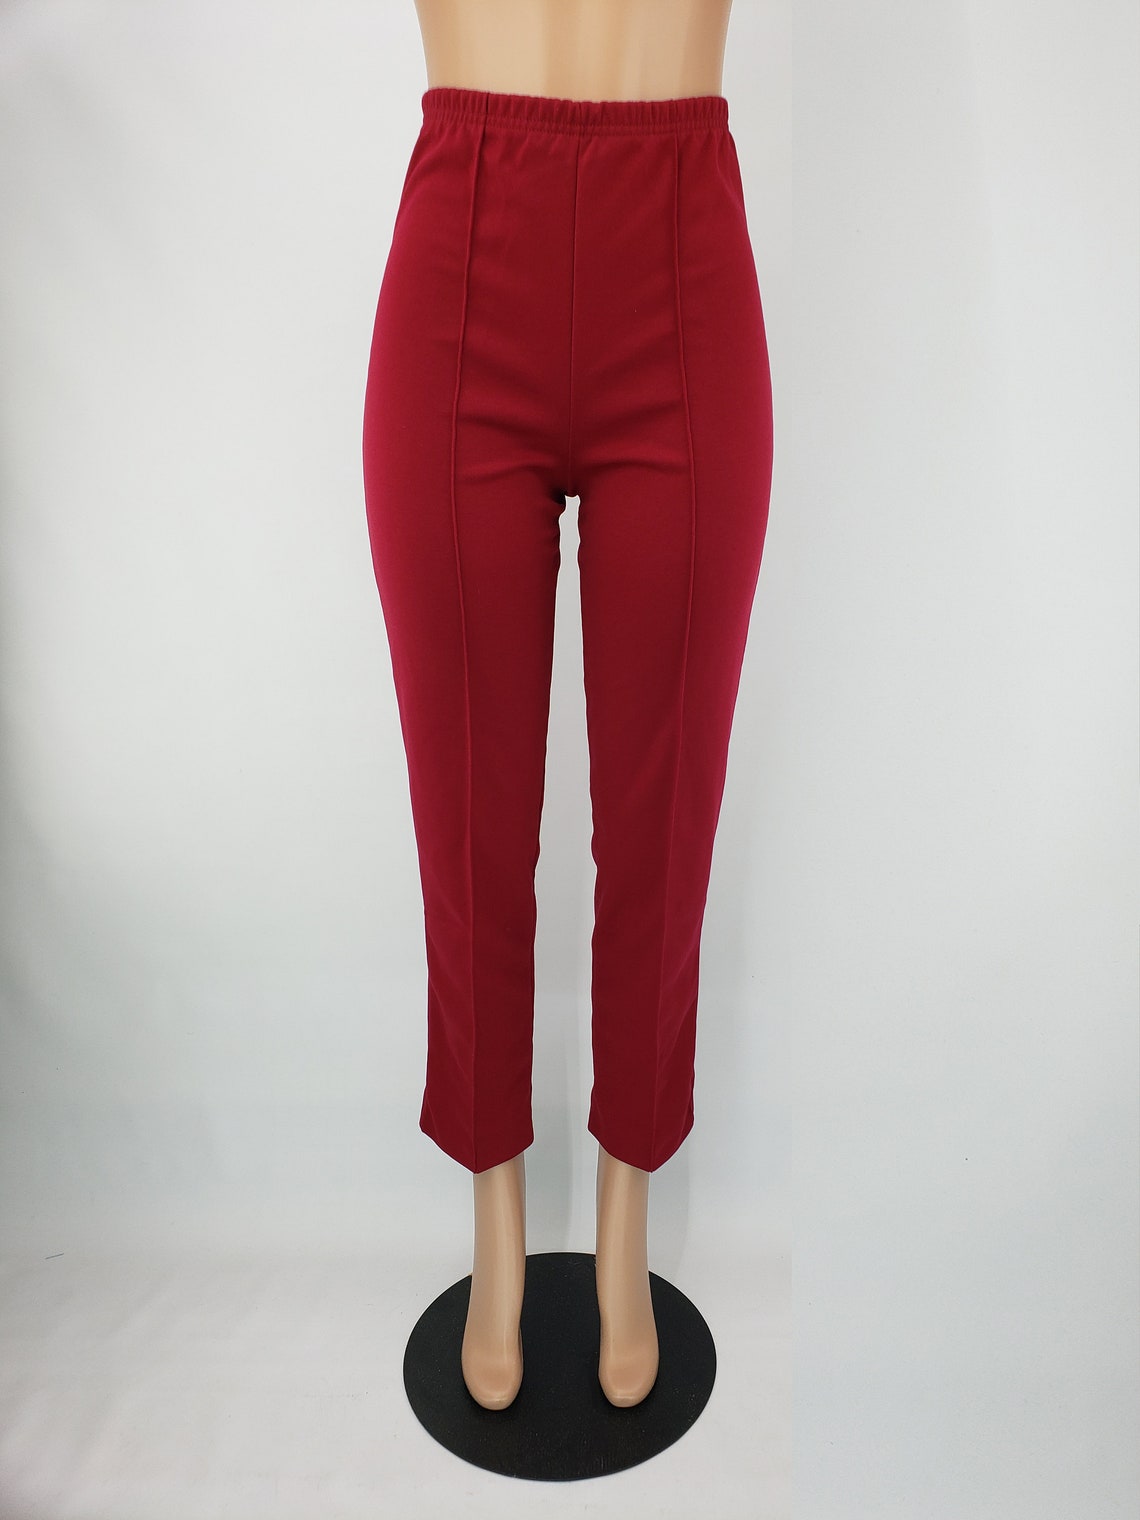 Vintage Maroon Burgundy High Waisted Polyester Pants with | Etsy